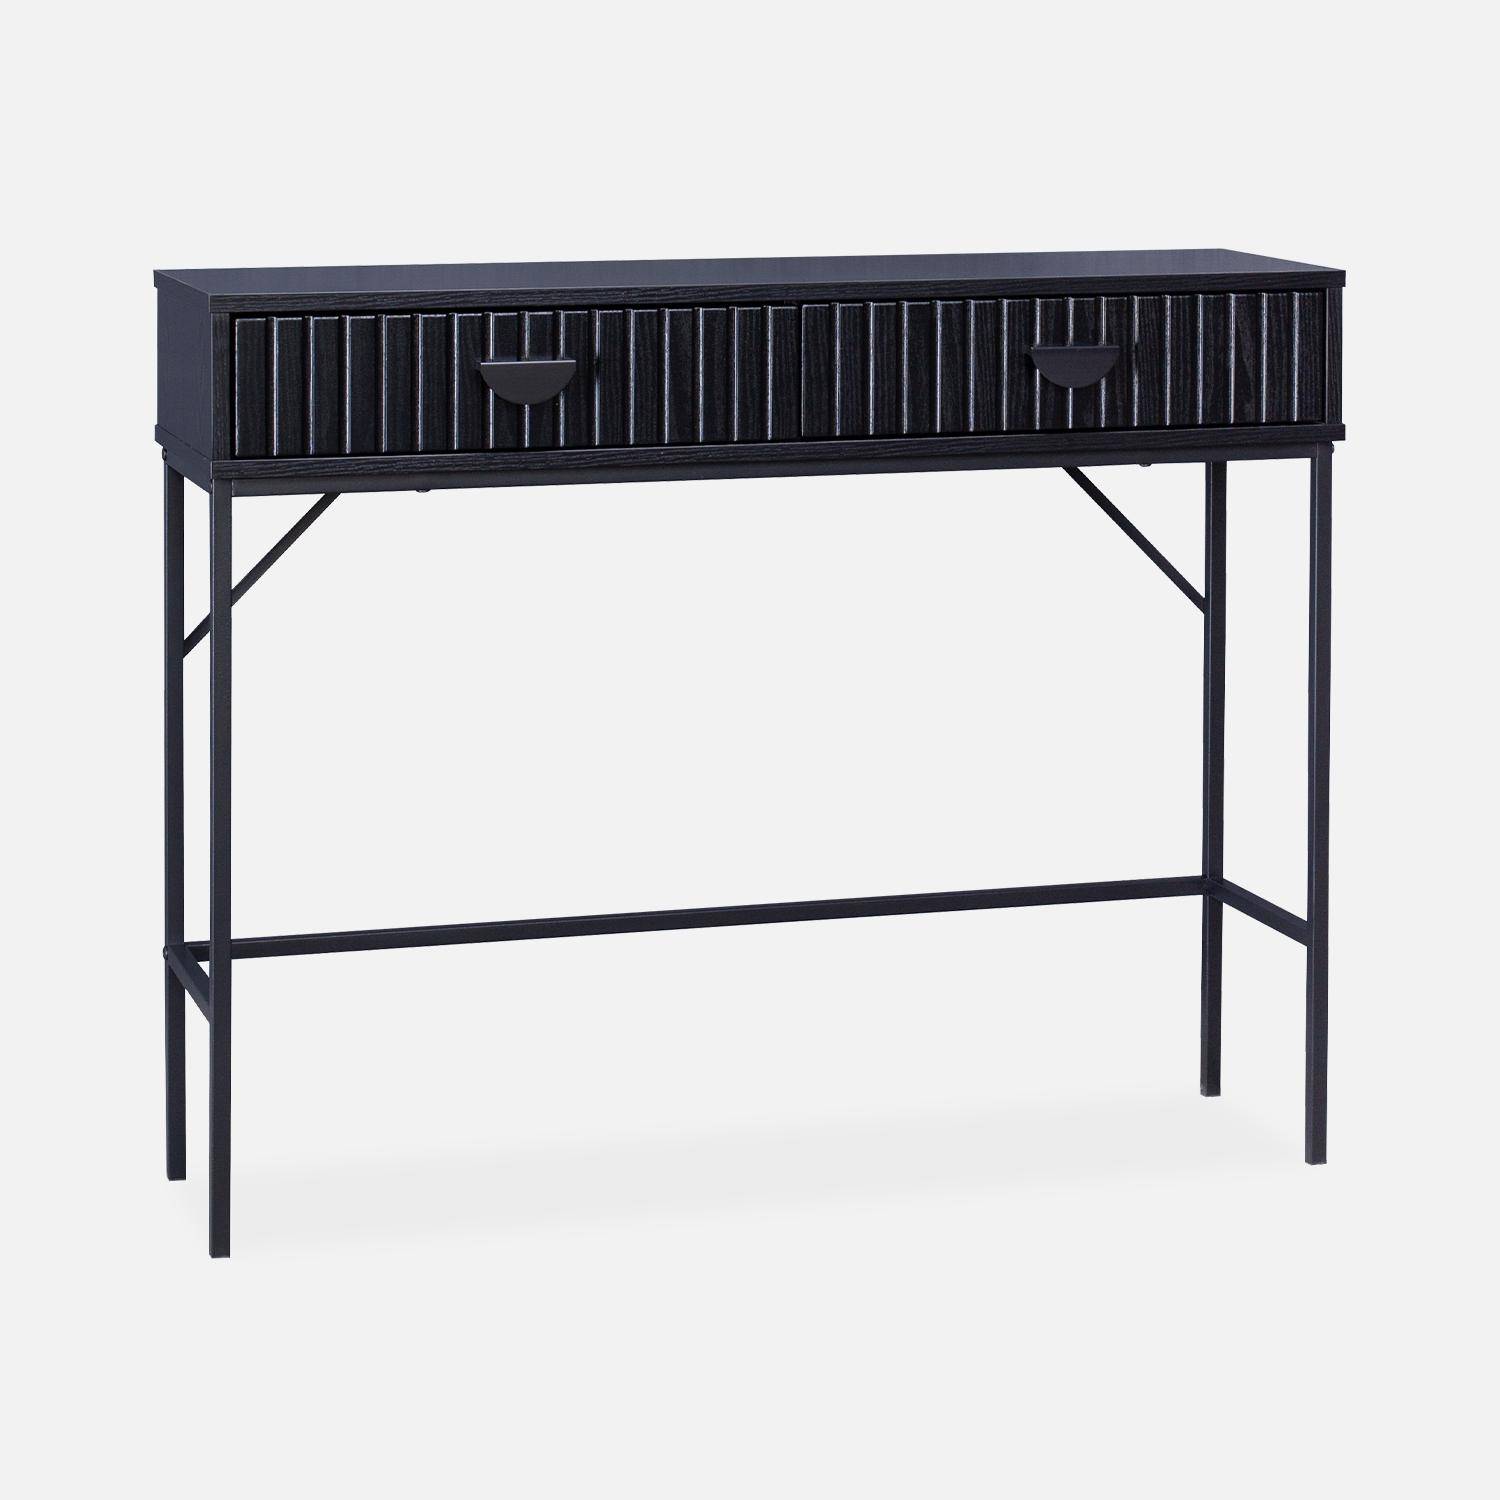 2-drawer console with black grooved wood effect, black metal legs, L100 xP29xH79.5cm Photo5